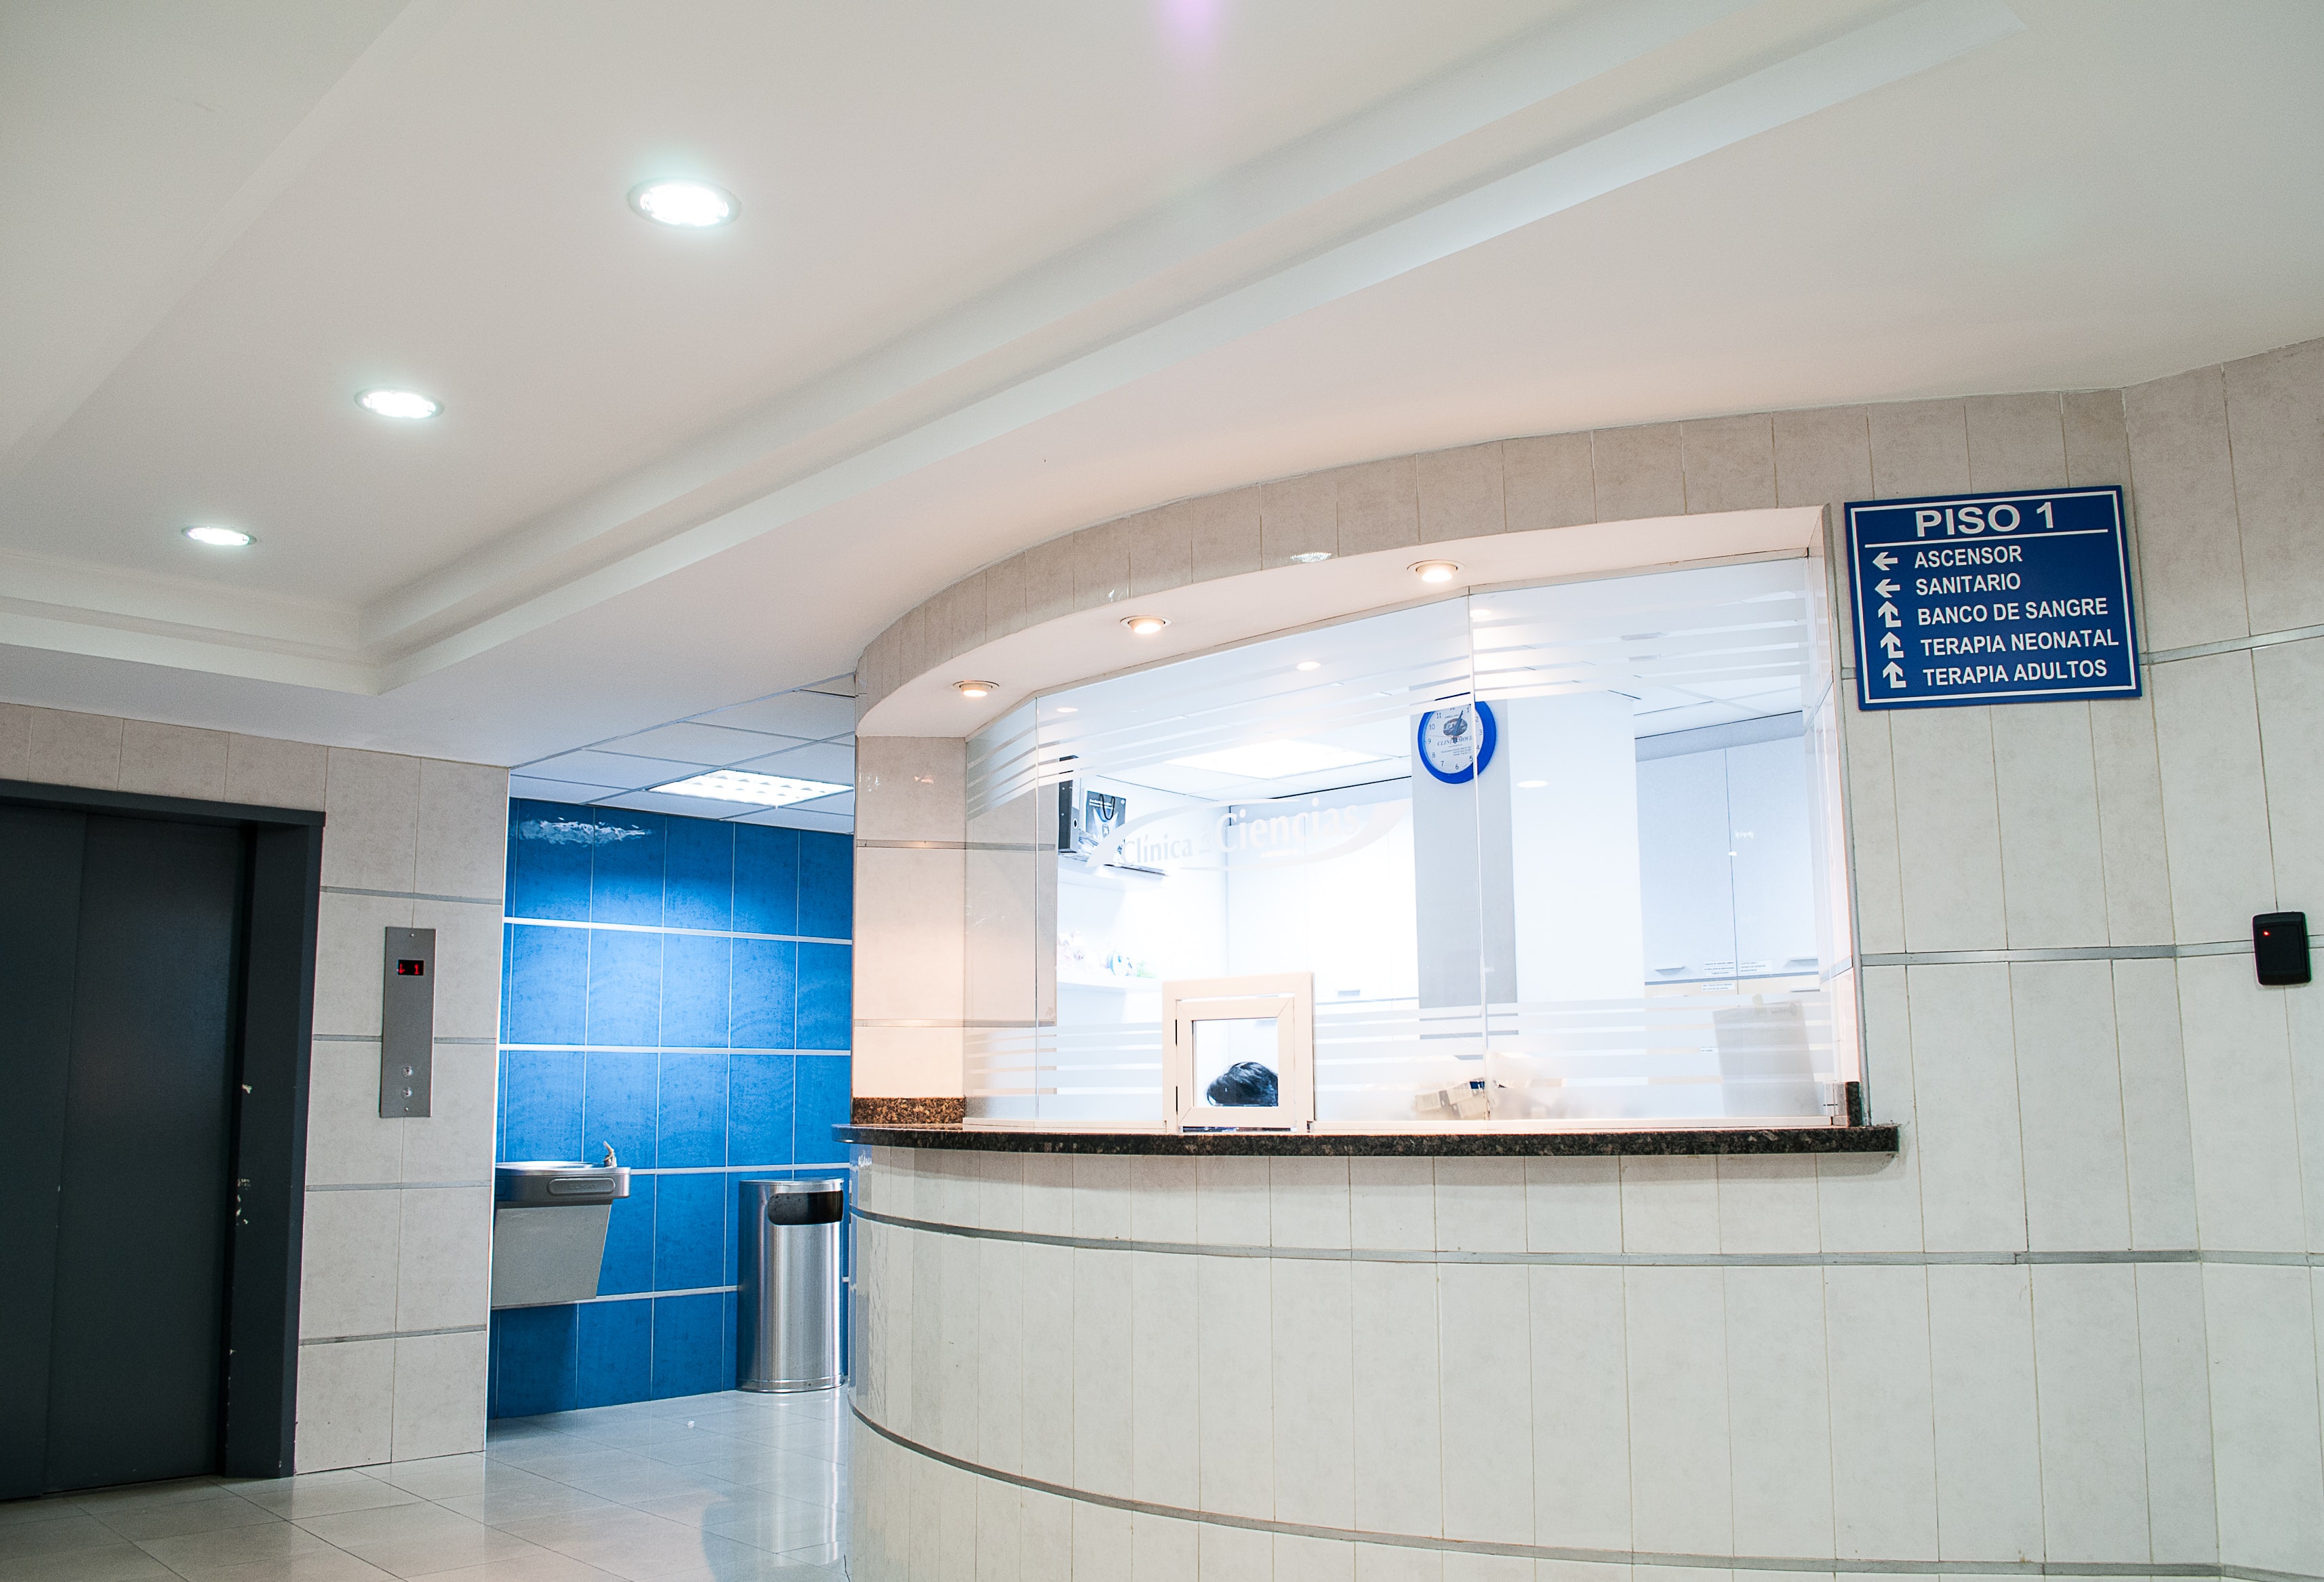 Hospital front desk and lobby area with blue wall